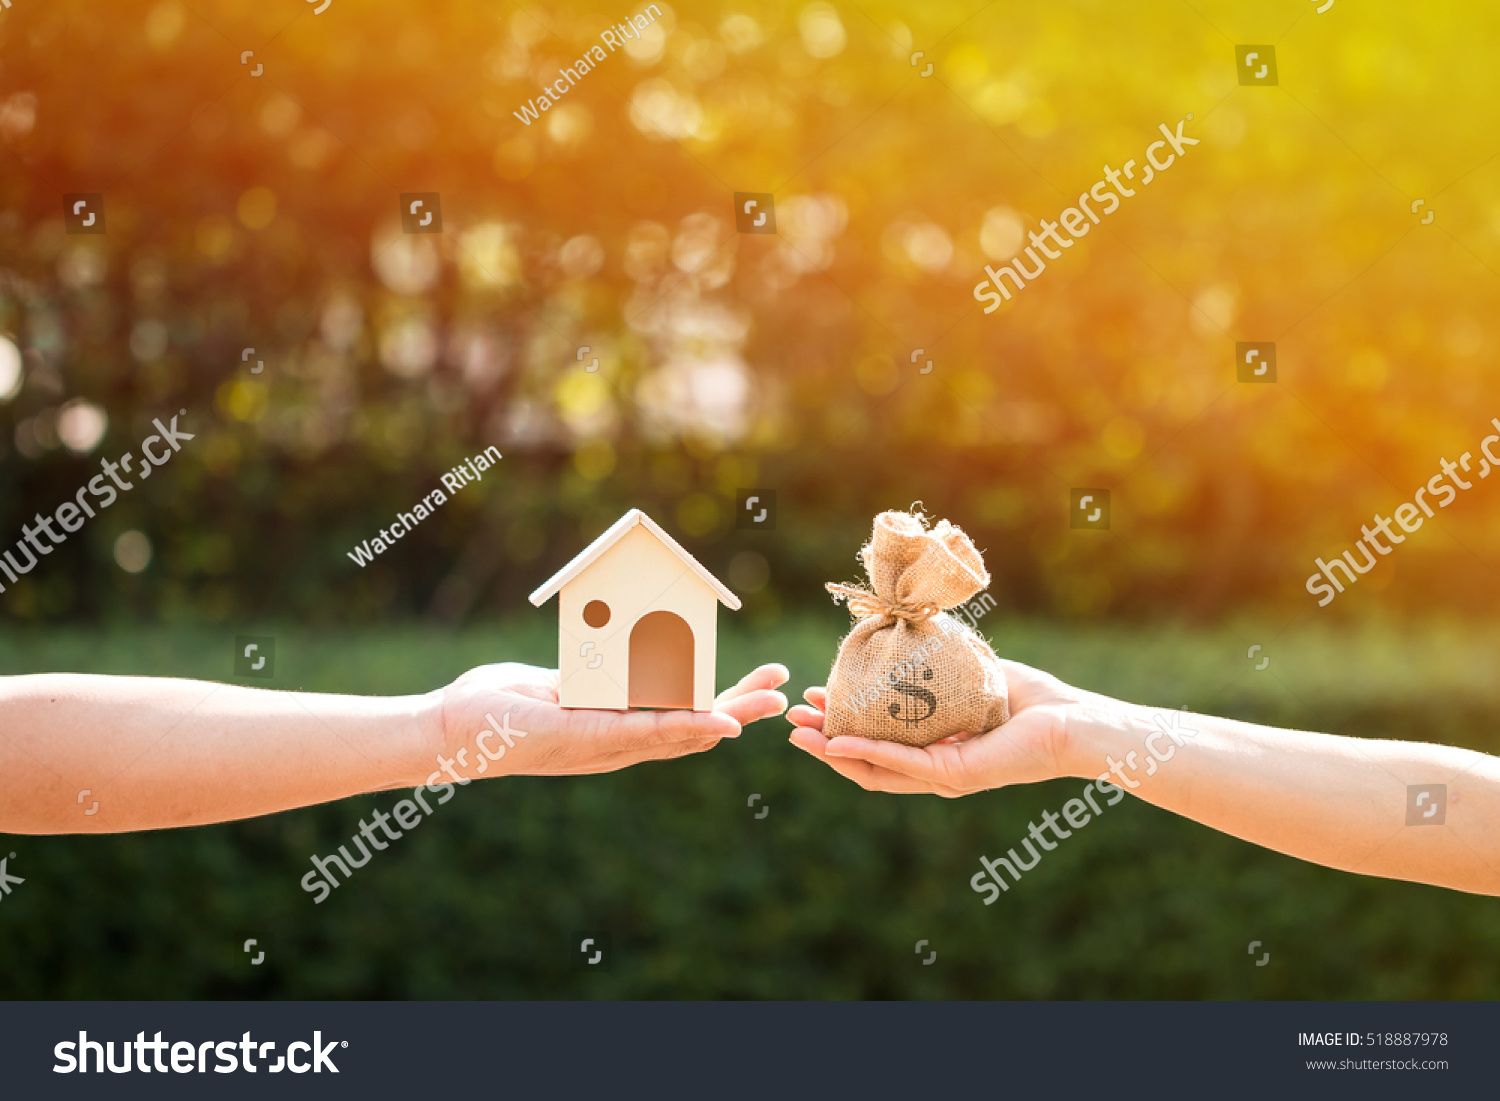 Loans for real estate concept, a man and a women hand holding a money bag and  a model home put together in the public park. #518887978